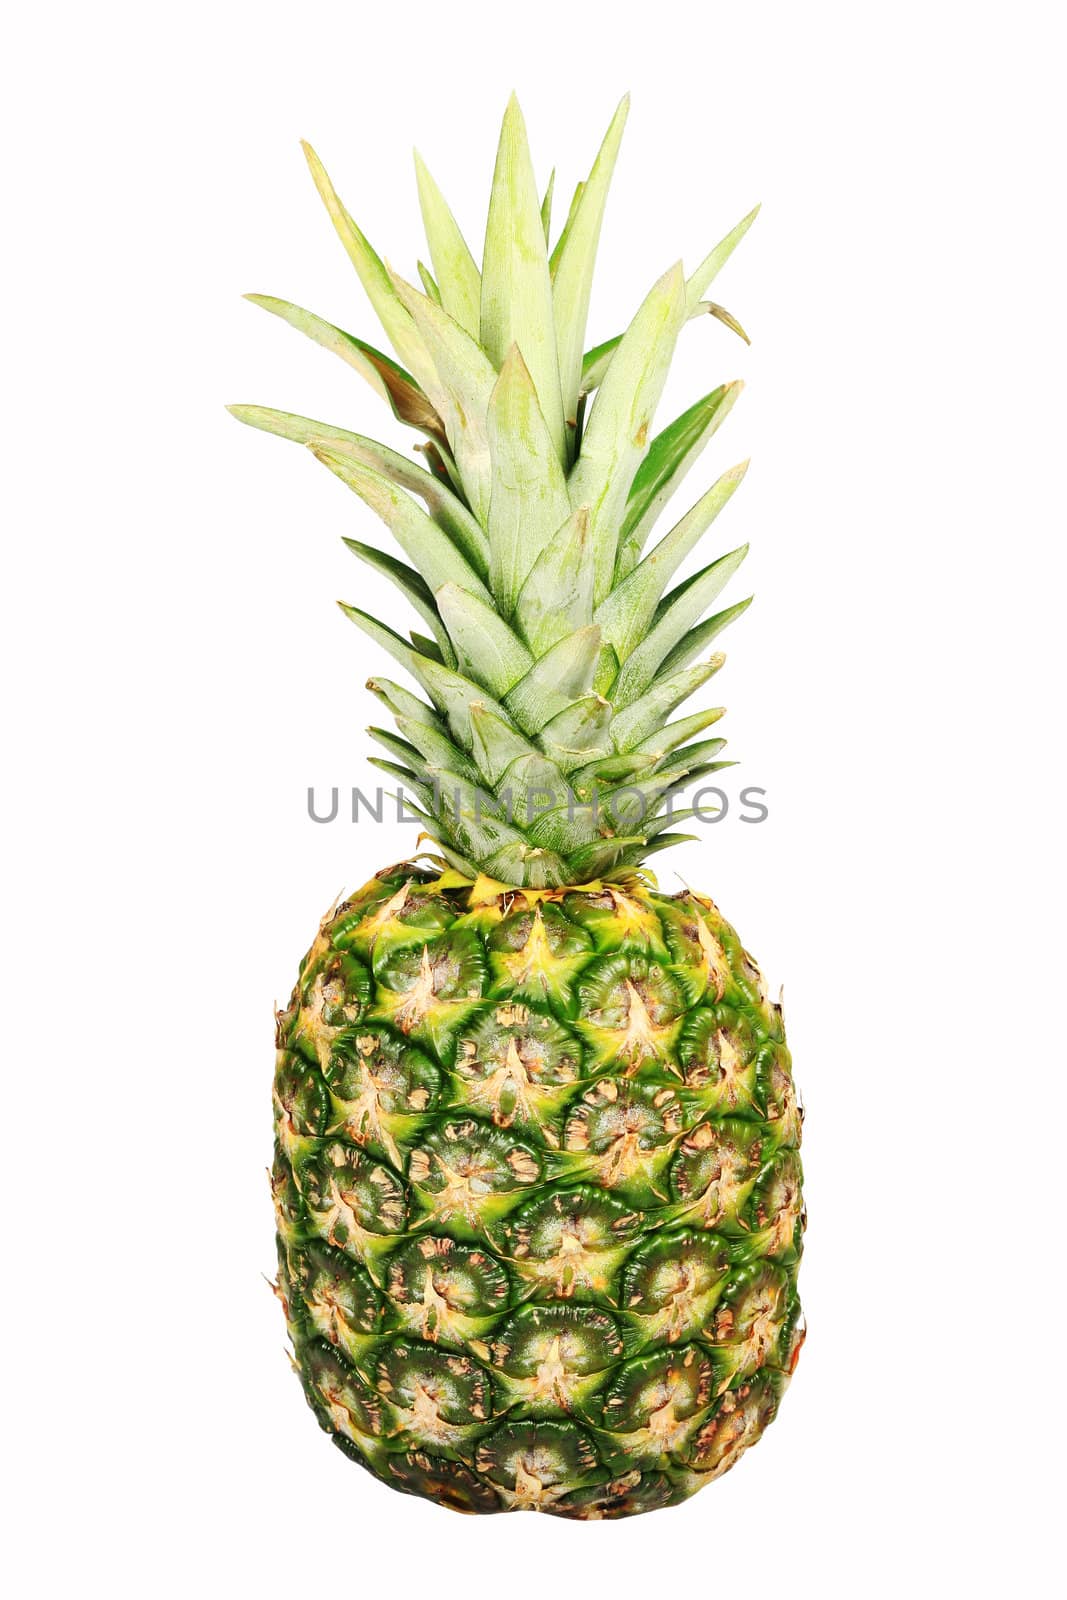 a lone pineapple isolated on white background
